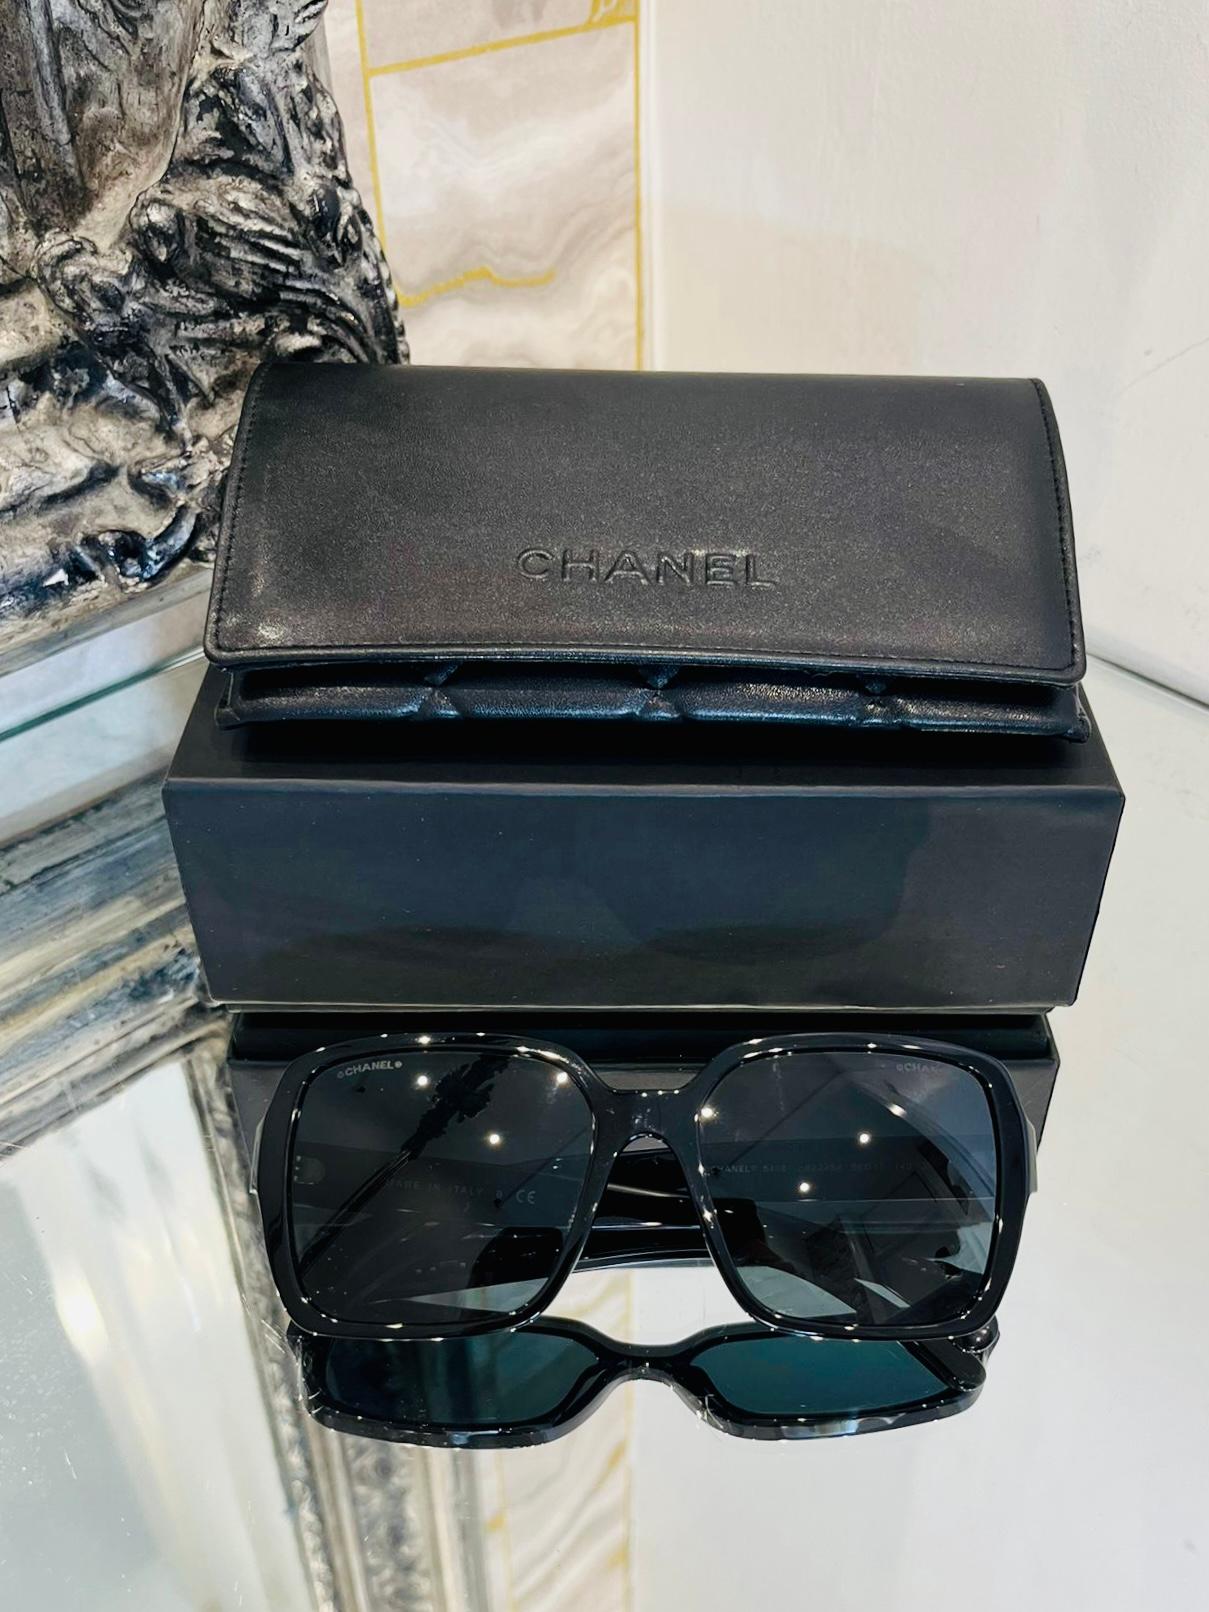 Chanel Logo 'CHANEL' Sunglasses 

Black acetate frames with gold 'CHANEL' lettering to each arm.

Size - One Size

Condition - Very Good

Composition - Plastic

Comes With - Branded Inner & Outer Box